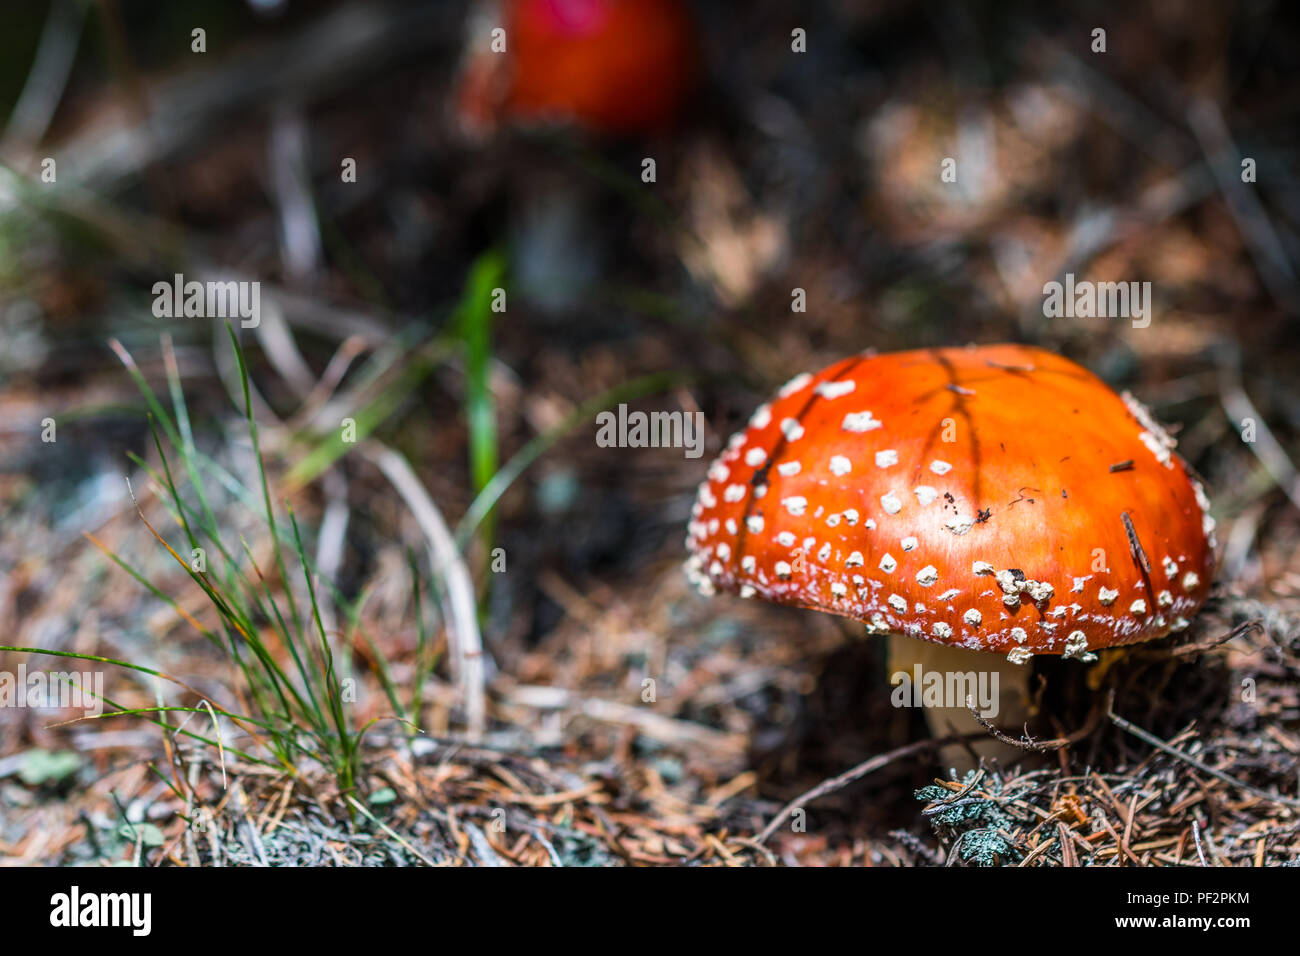 A beautiful but highly poisonous red mushroom with white points commonly known as fly agaric or fly amanita. Toadstool in a forest. Also known as Aman Stock Photo